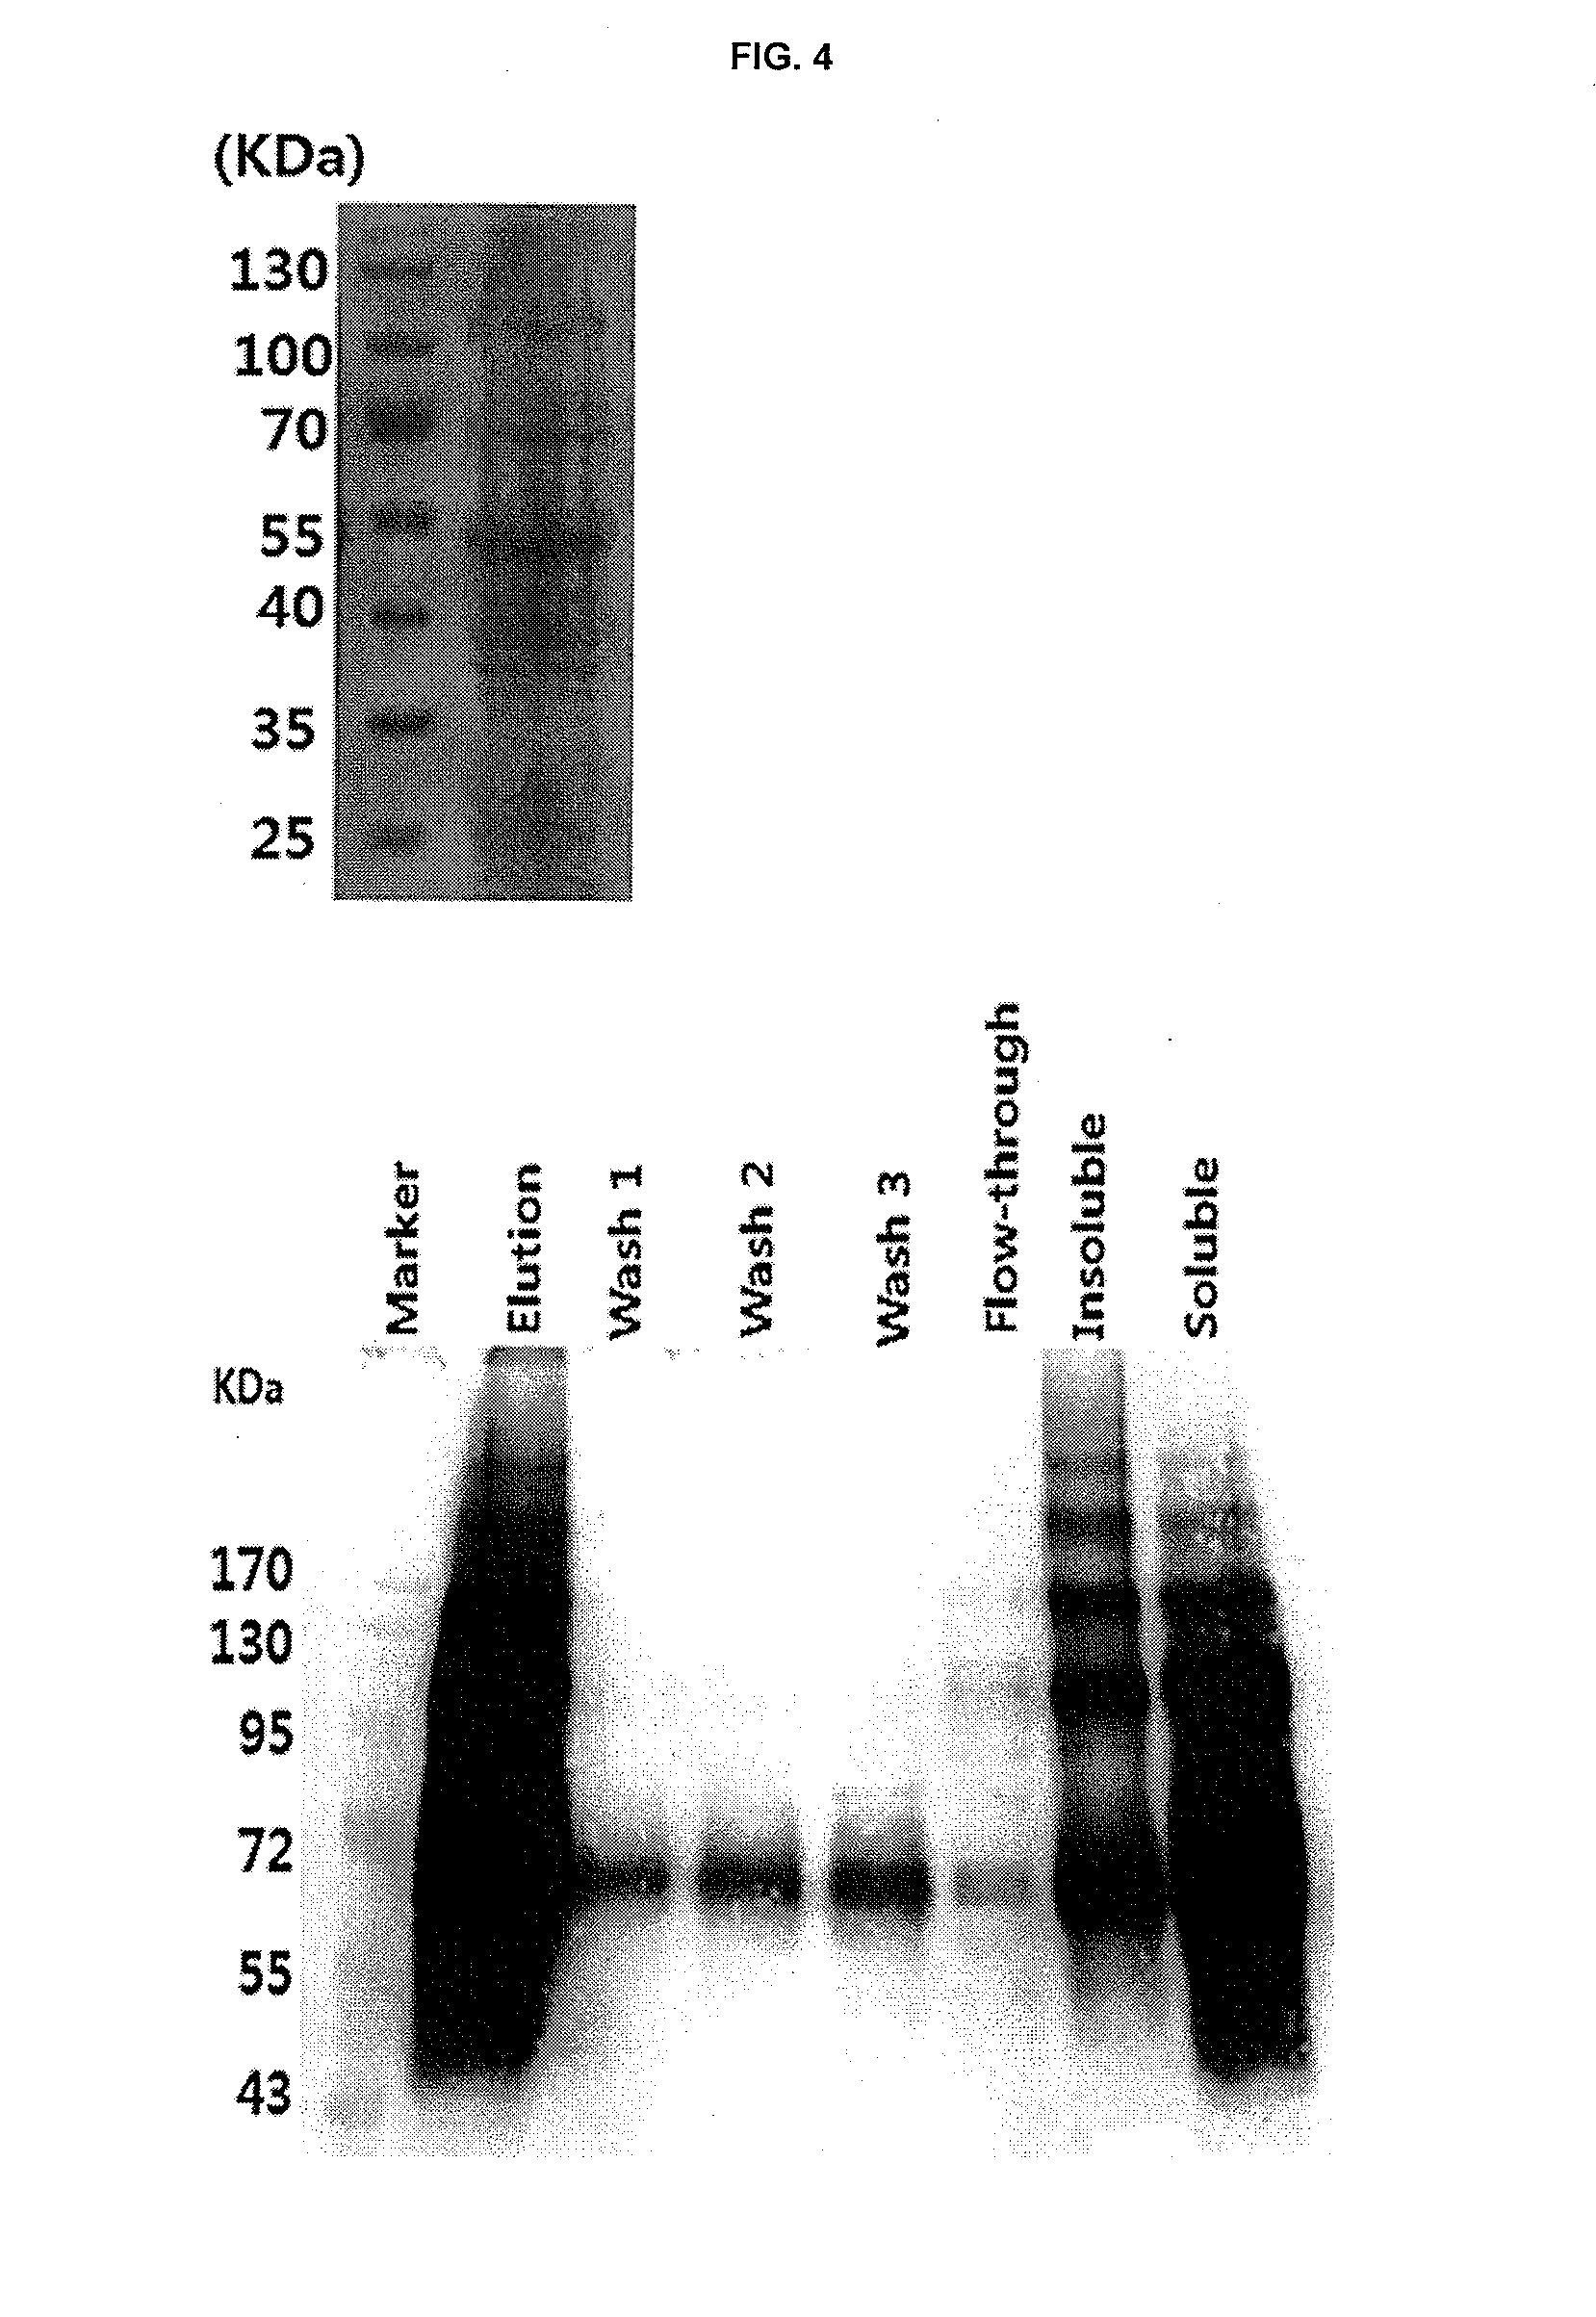 Recombinant silk protein derived from sea anemones, method for manufacturing same, and composition for manufacturing silk fibers including same